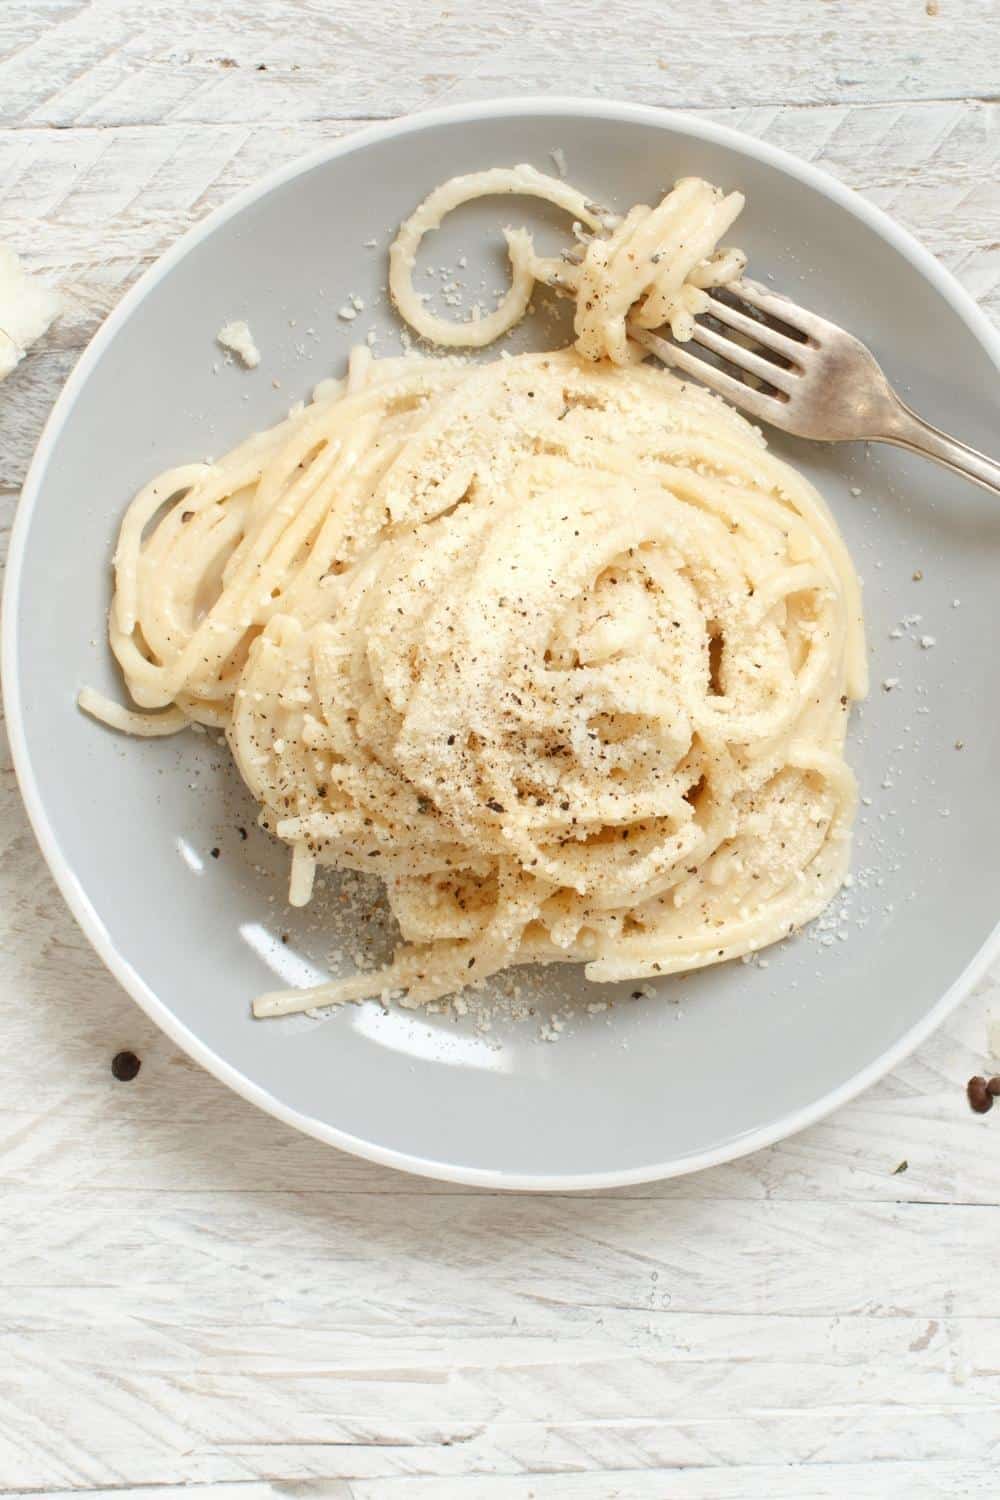 butter spaghetti noodles on a gray plate